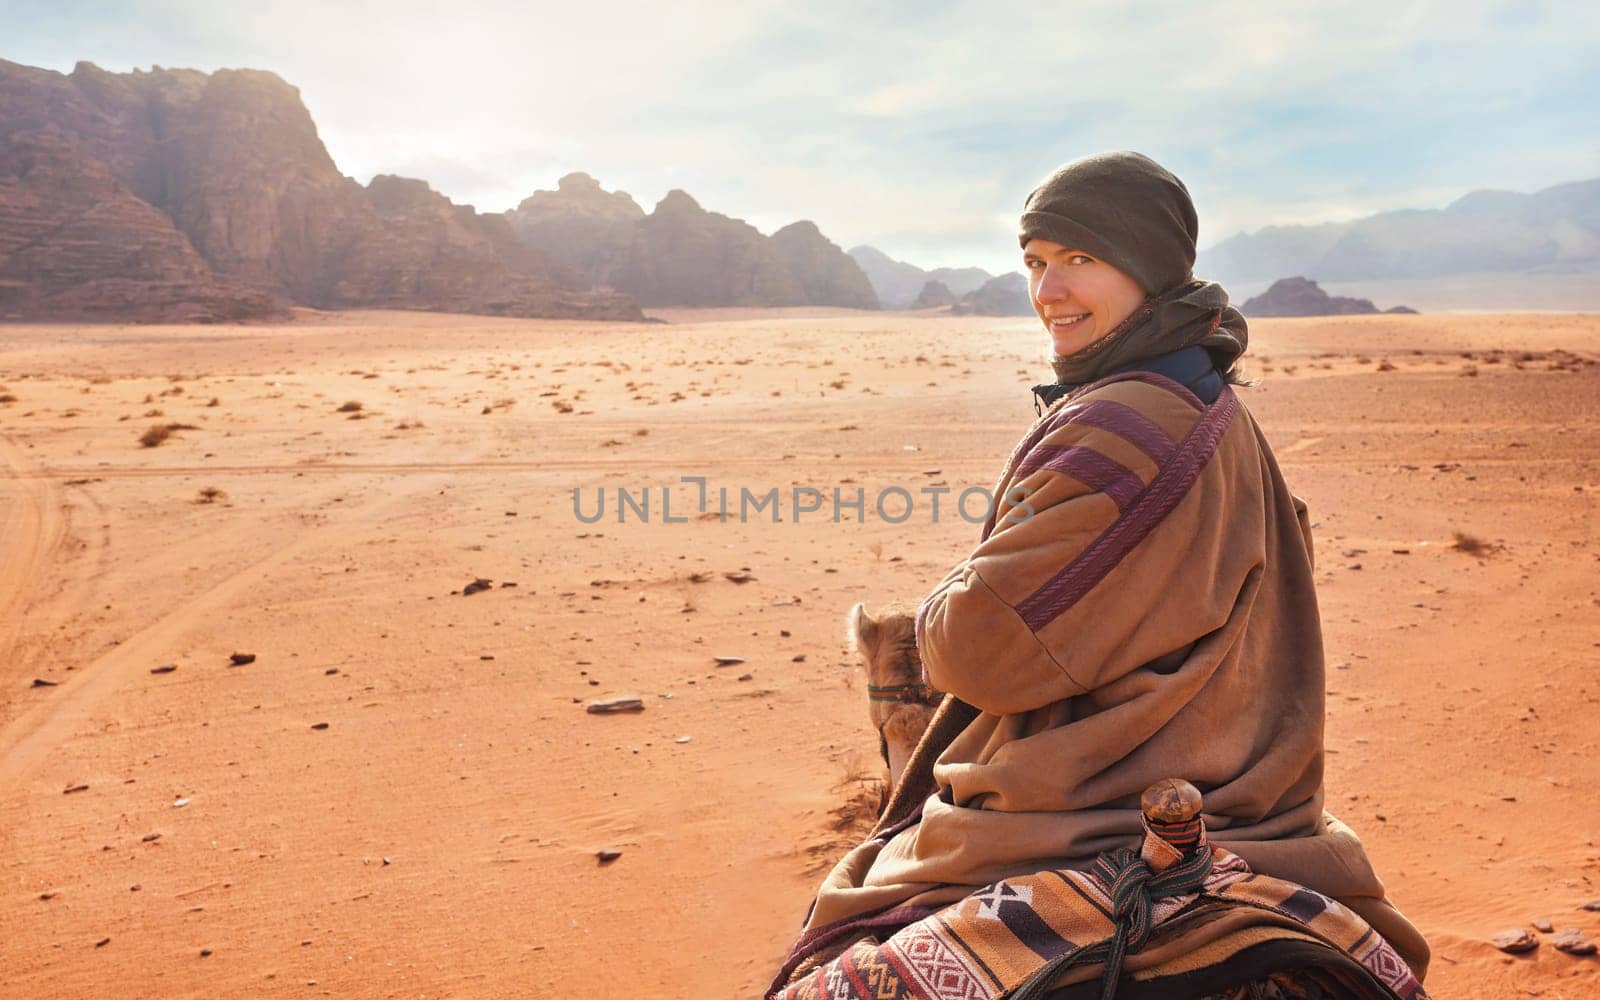 Young woman riding camel in desert, looking back over her shoulder, smiling. It's quite cold so she is wearing traditional Bedouin coat - bisht - and head scarf, mountains far background by Ivanko